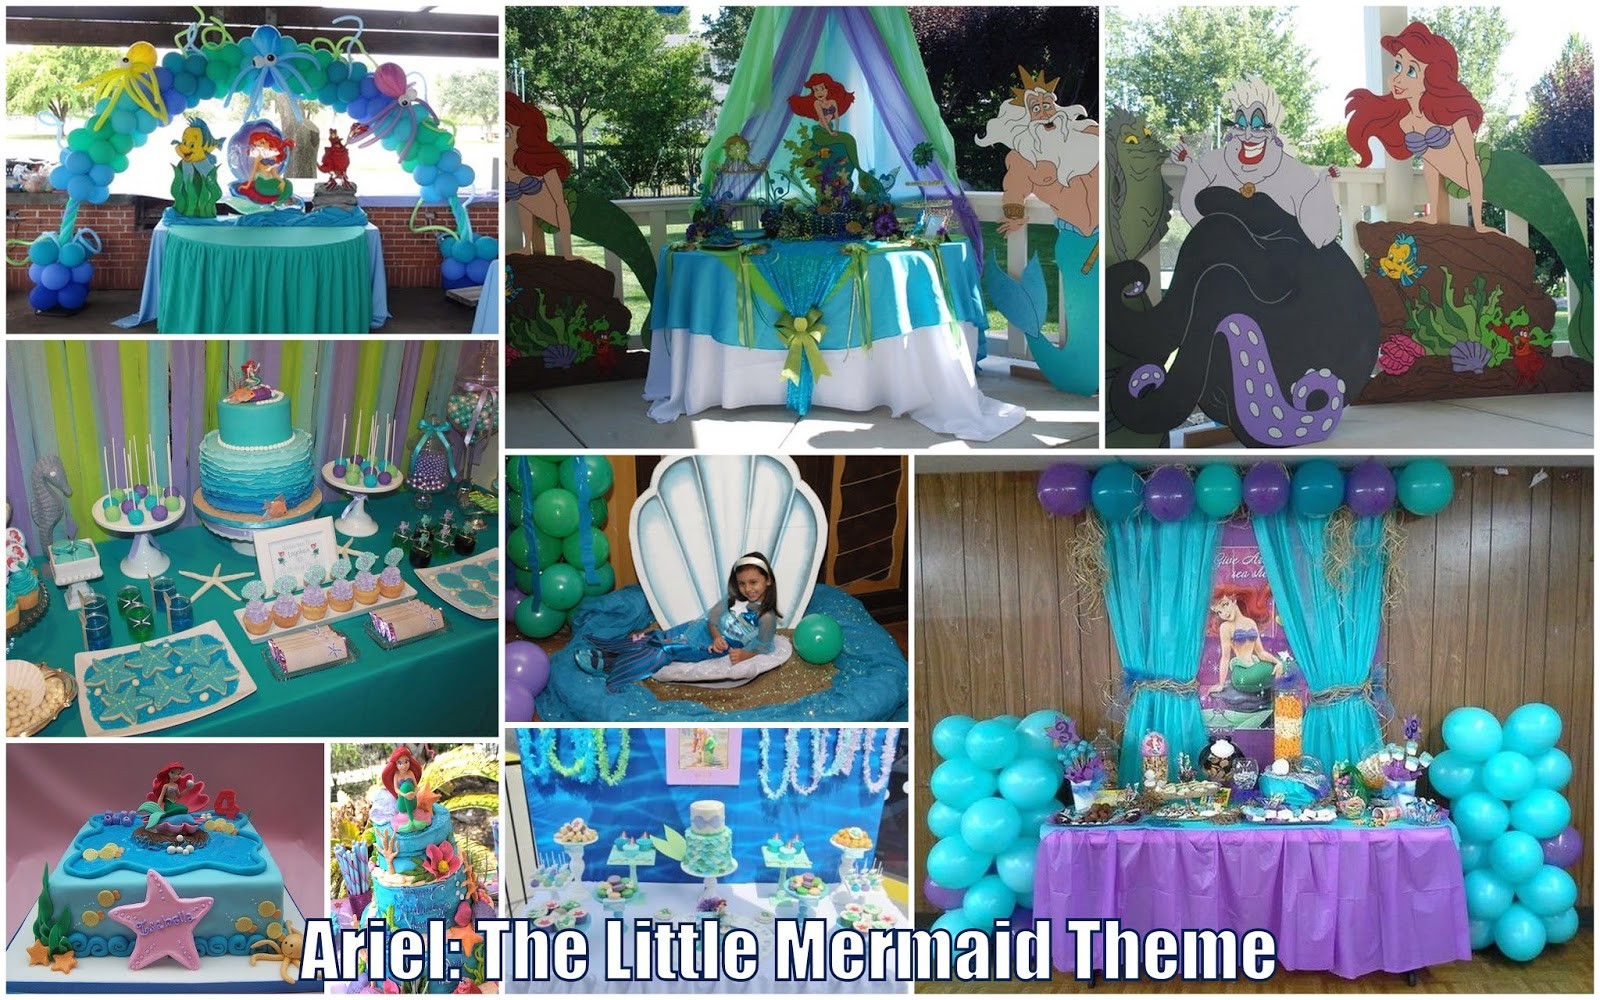 Ariel Little Mermaid Party Ideas
 2015 Athena Miel s Balloons Bubbles and Party Needs